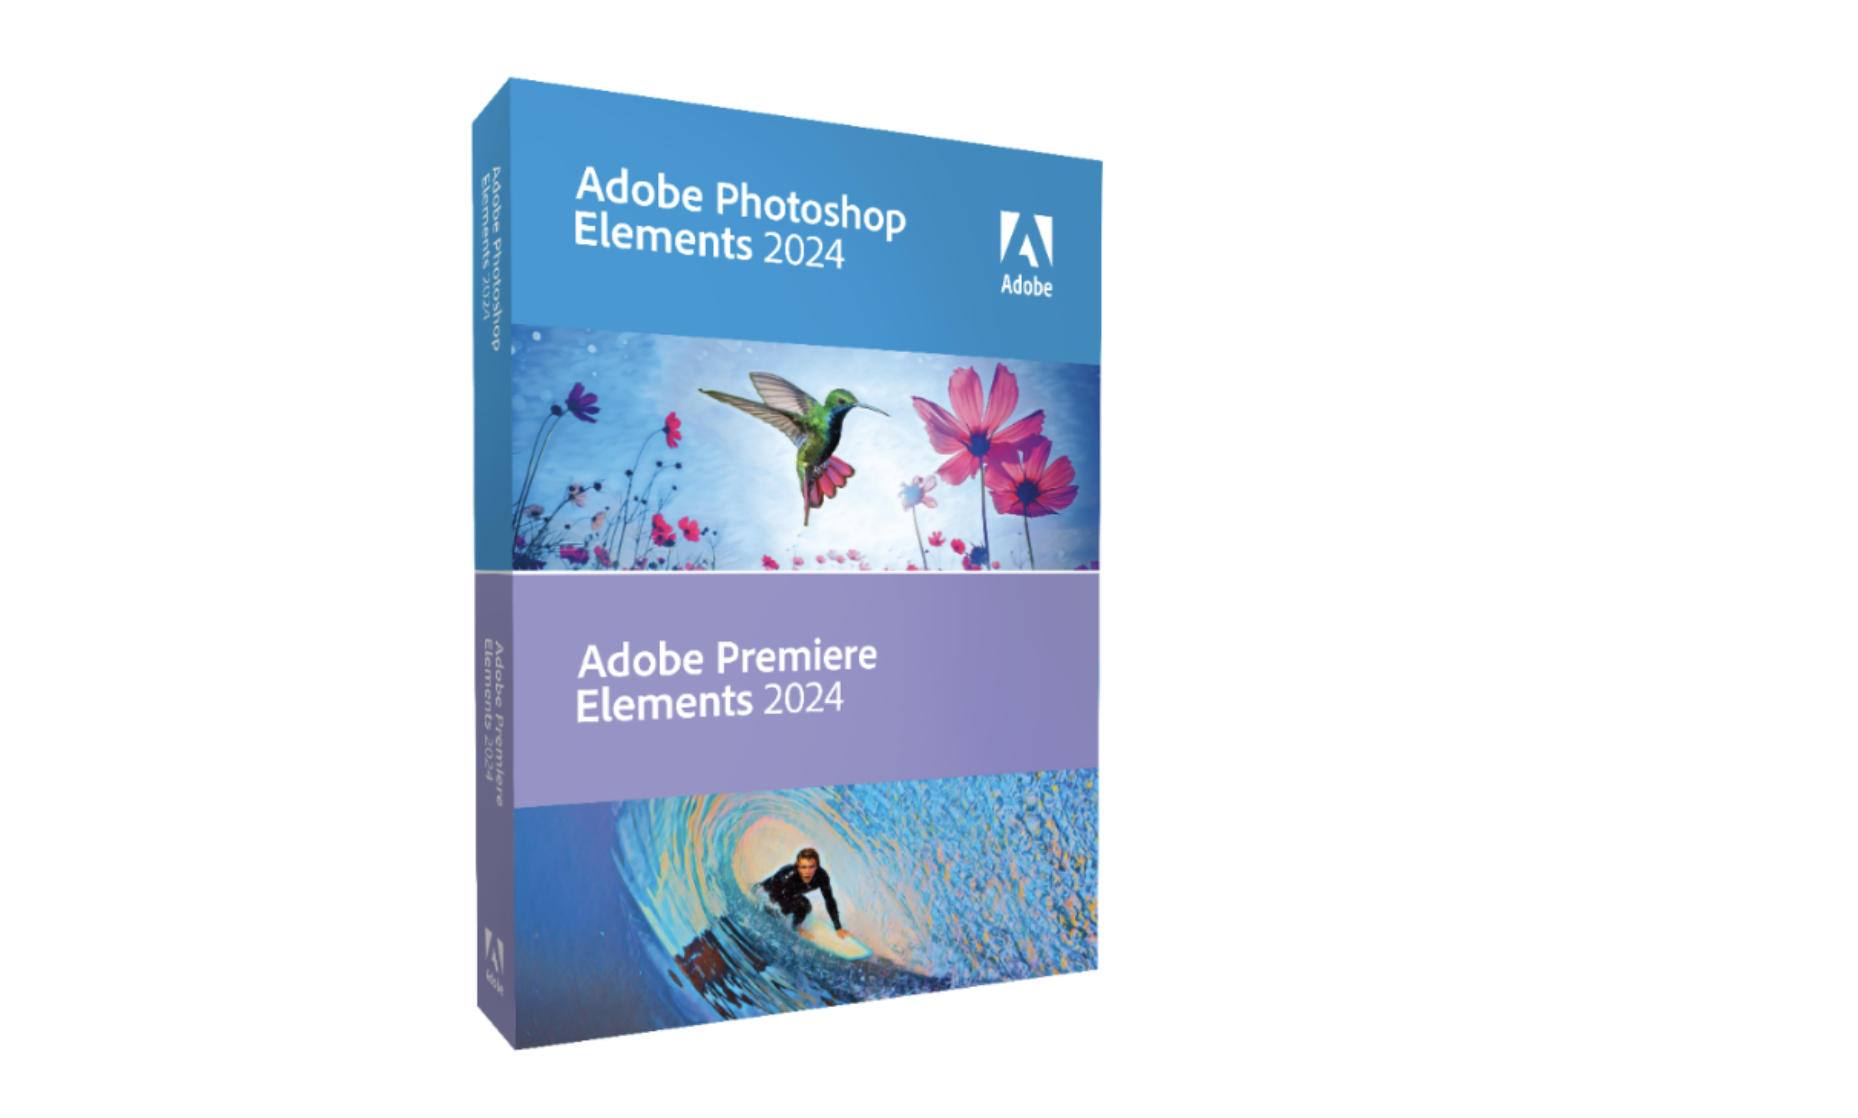 Adobe launches new Elements 2024 and Premiere Elements 2024